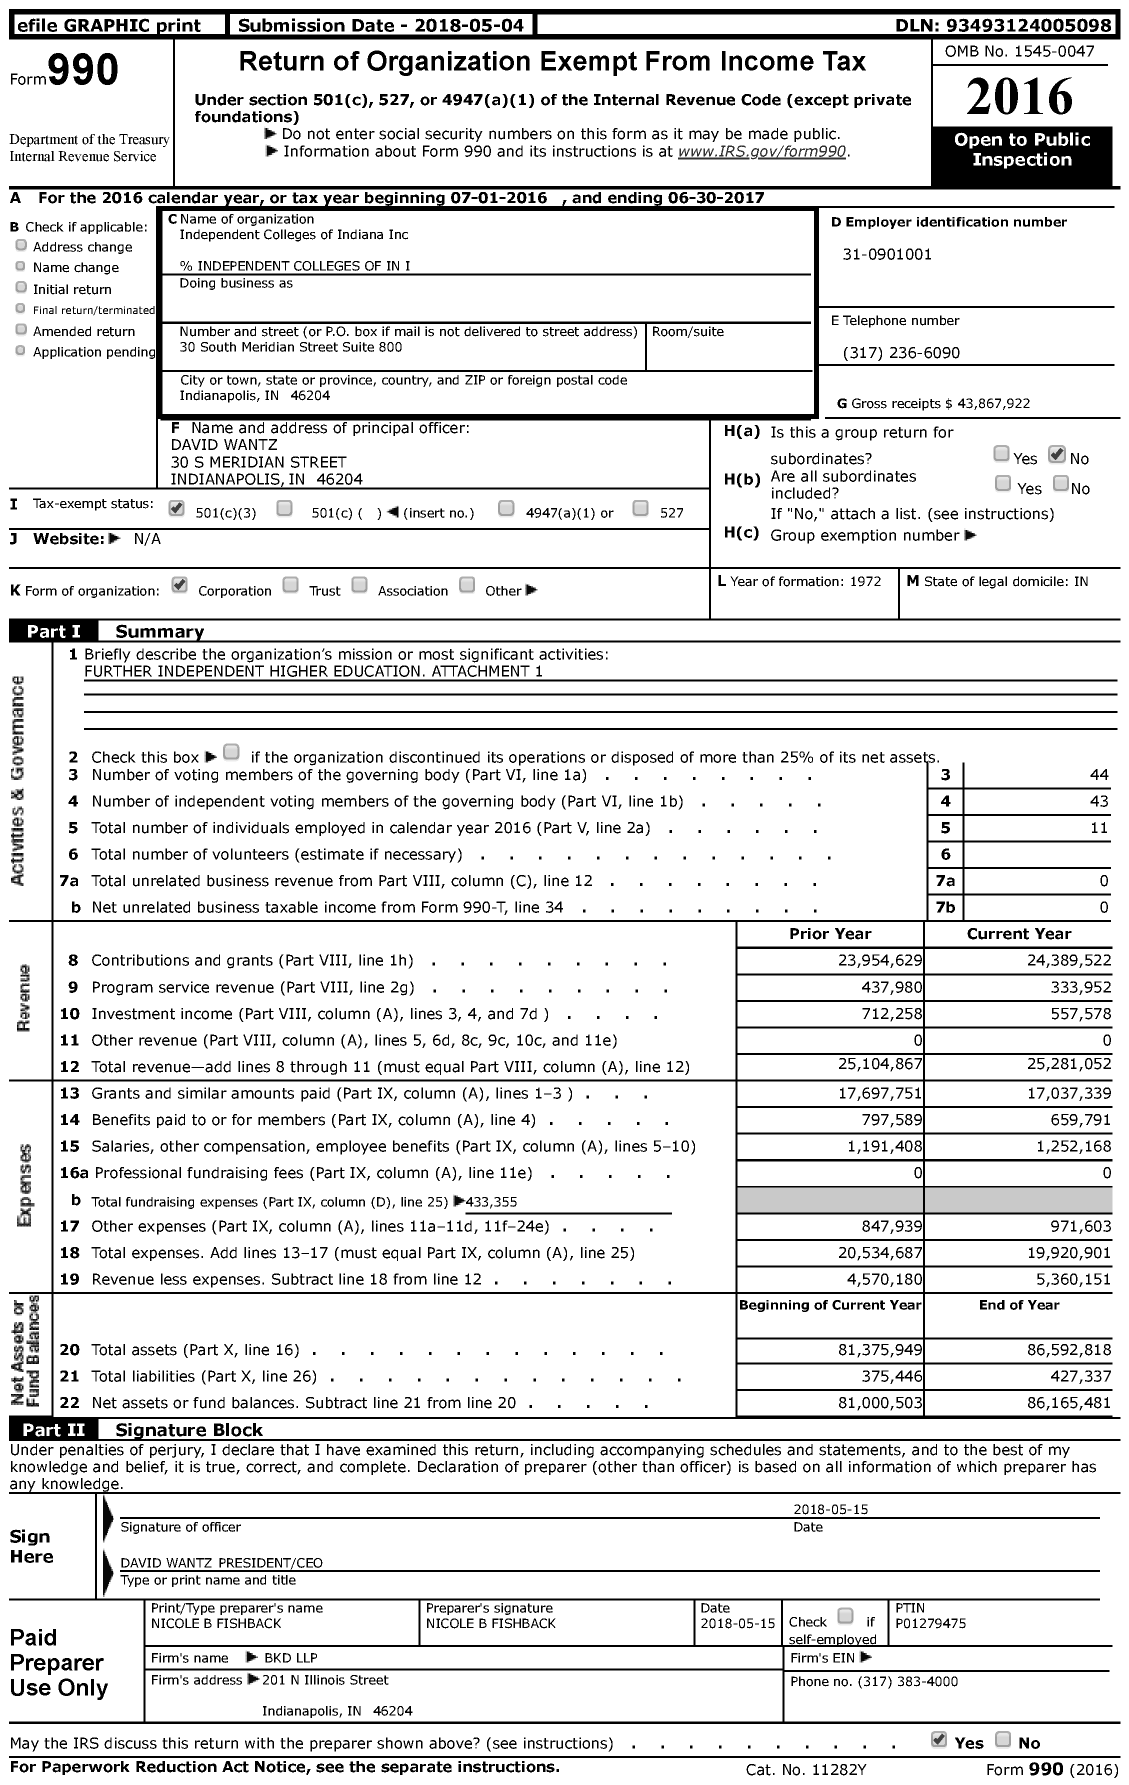 Image of first page of 2016 Form 990 for Independent Colleges of Indiana (ICI)